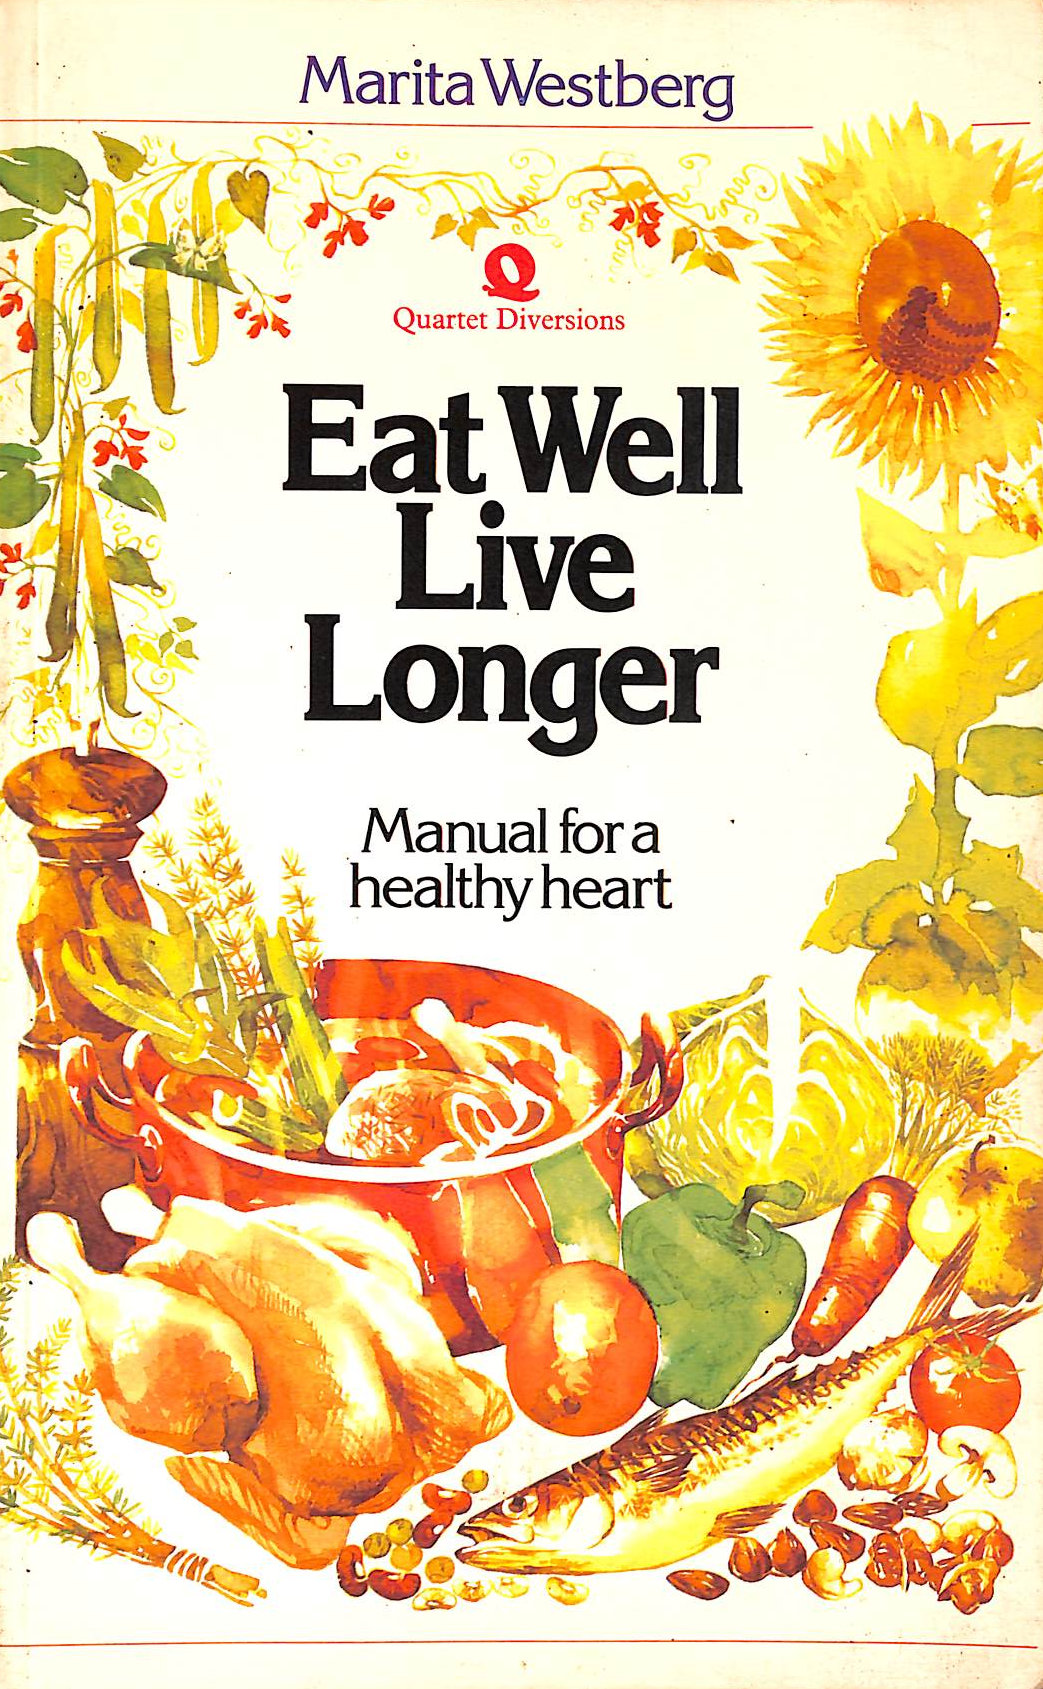 VARIOUS - Eat Well, Live Longer: Manual for a Healthy Heart (Quartet diversions)